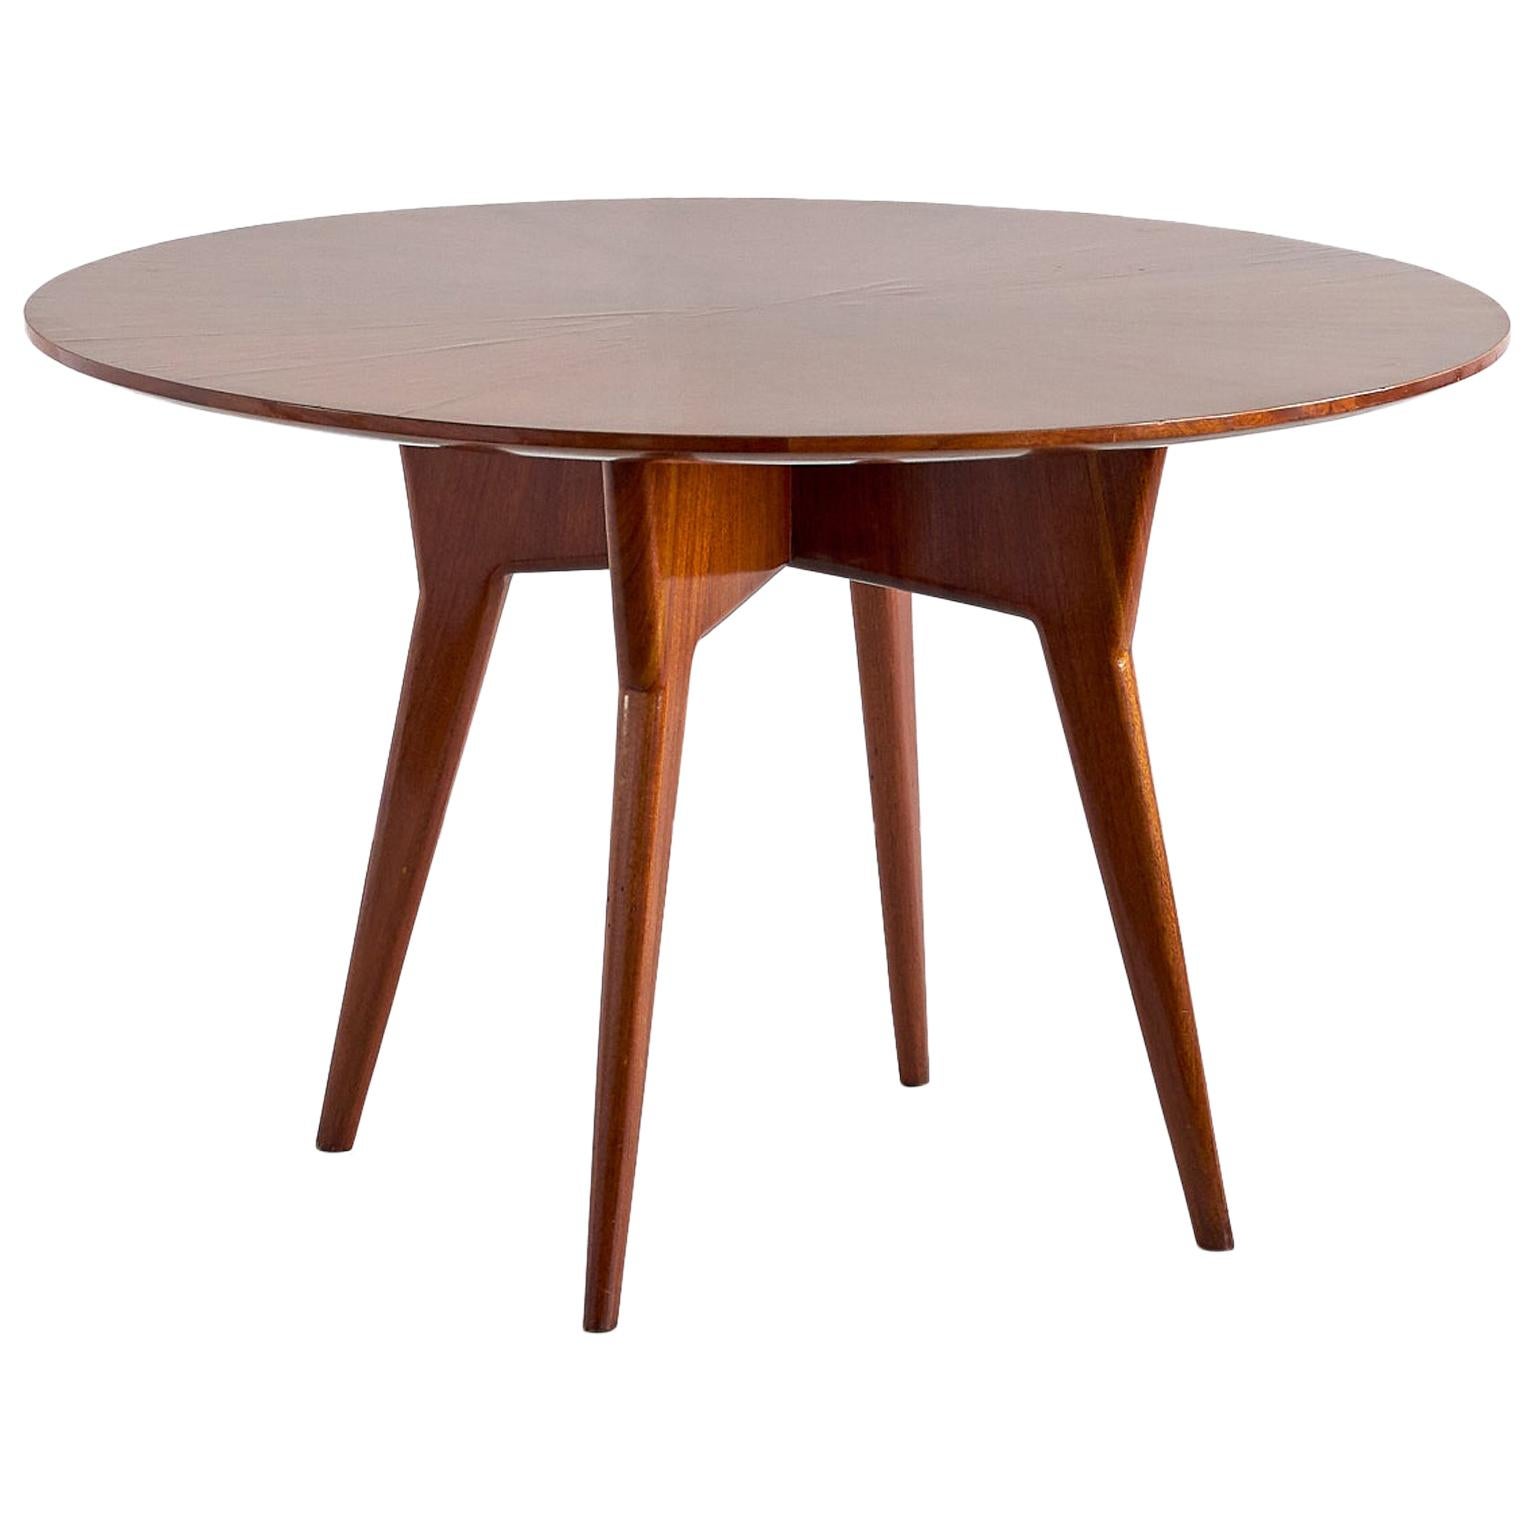 Gio Ponti Round Dining Table in Mahogany and Thuja Burr, Italy, Early 1950s